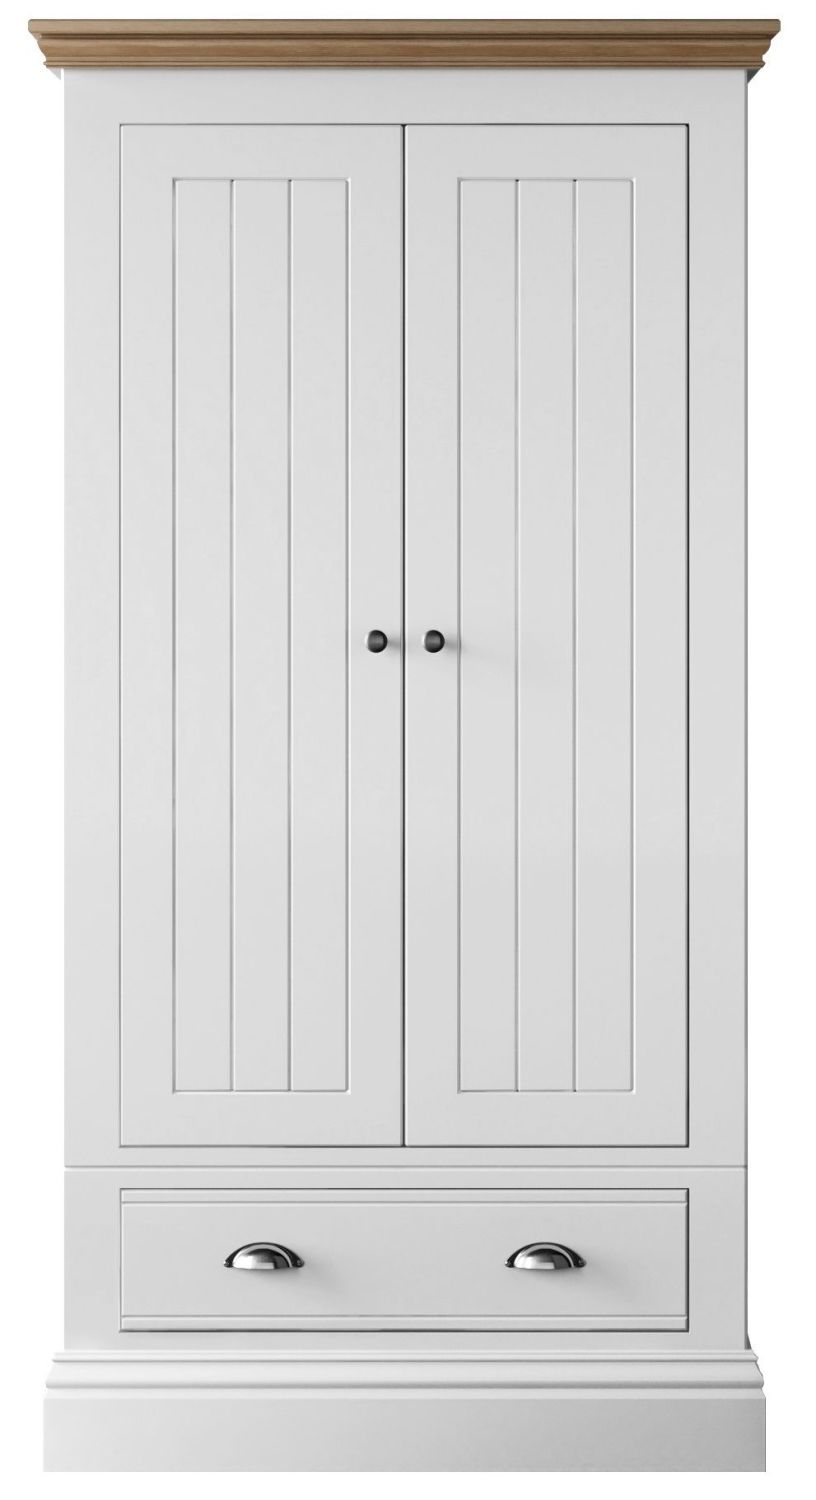 New Forest Wardrobe Painted/Oak - 2 Door Wardrobe with 1 Drawer (Small)